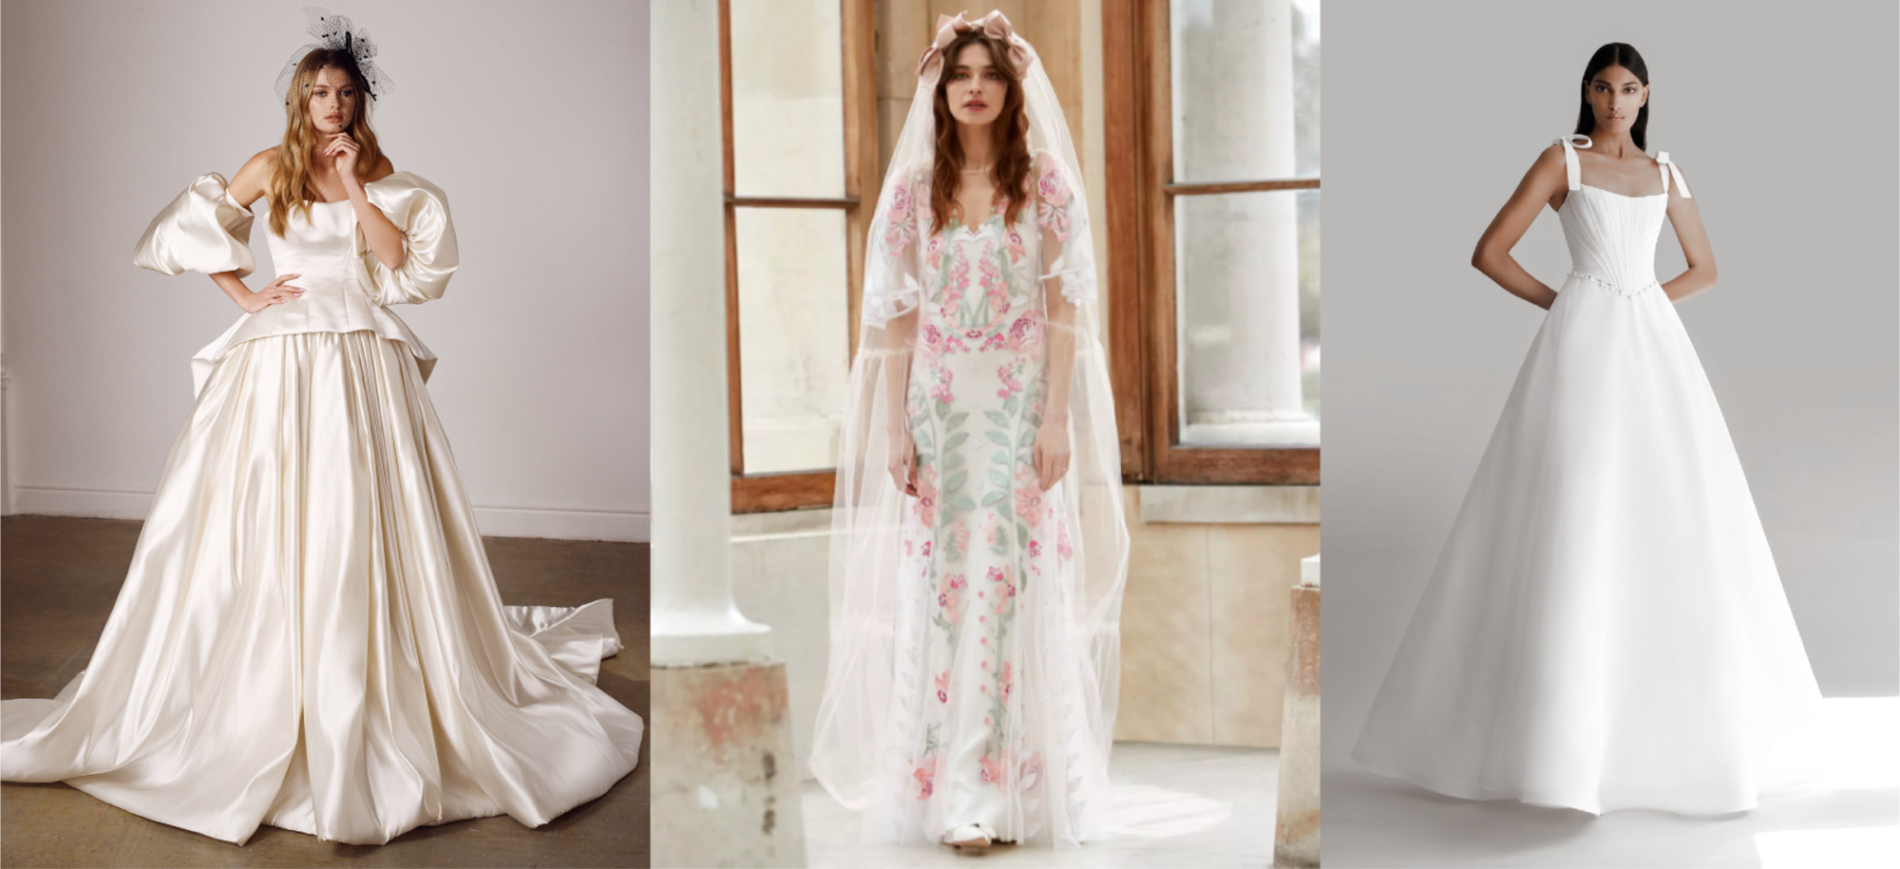 The Top 10 Trend Takeaways From Spring 2022 Bridal Fashion Week